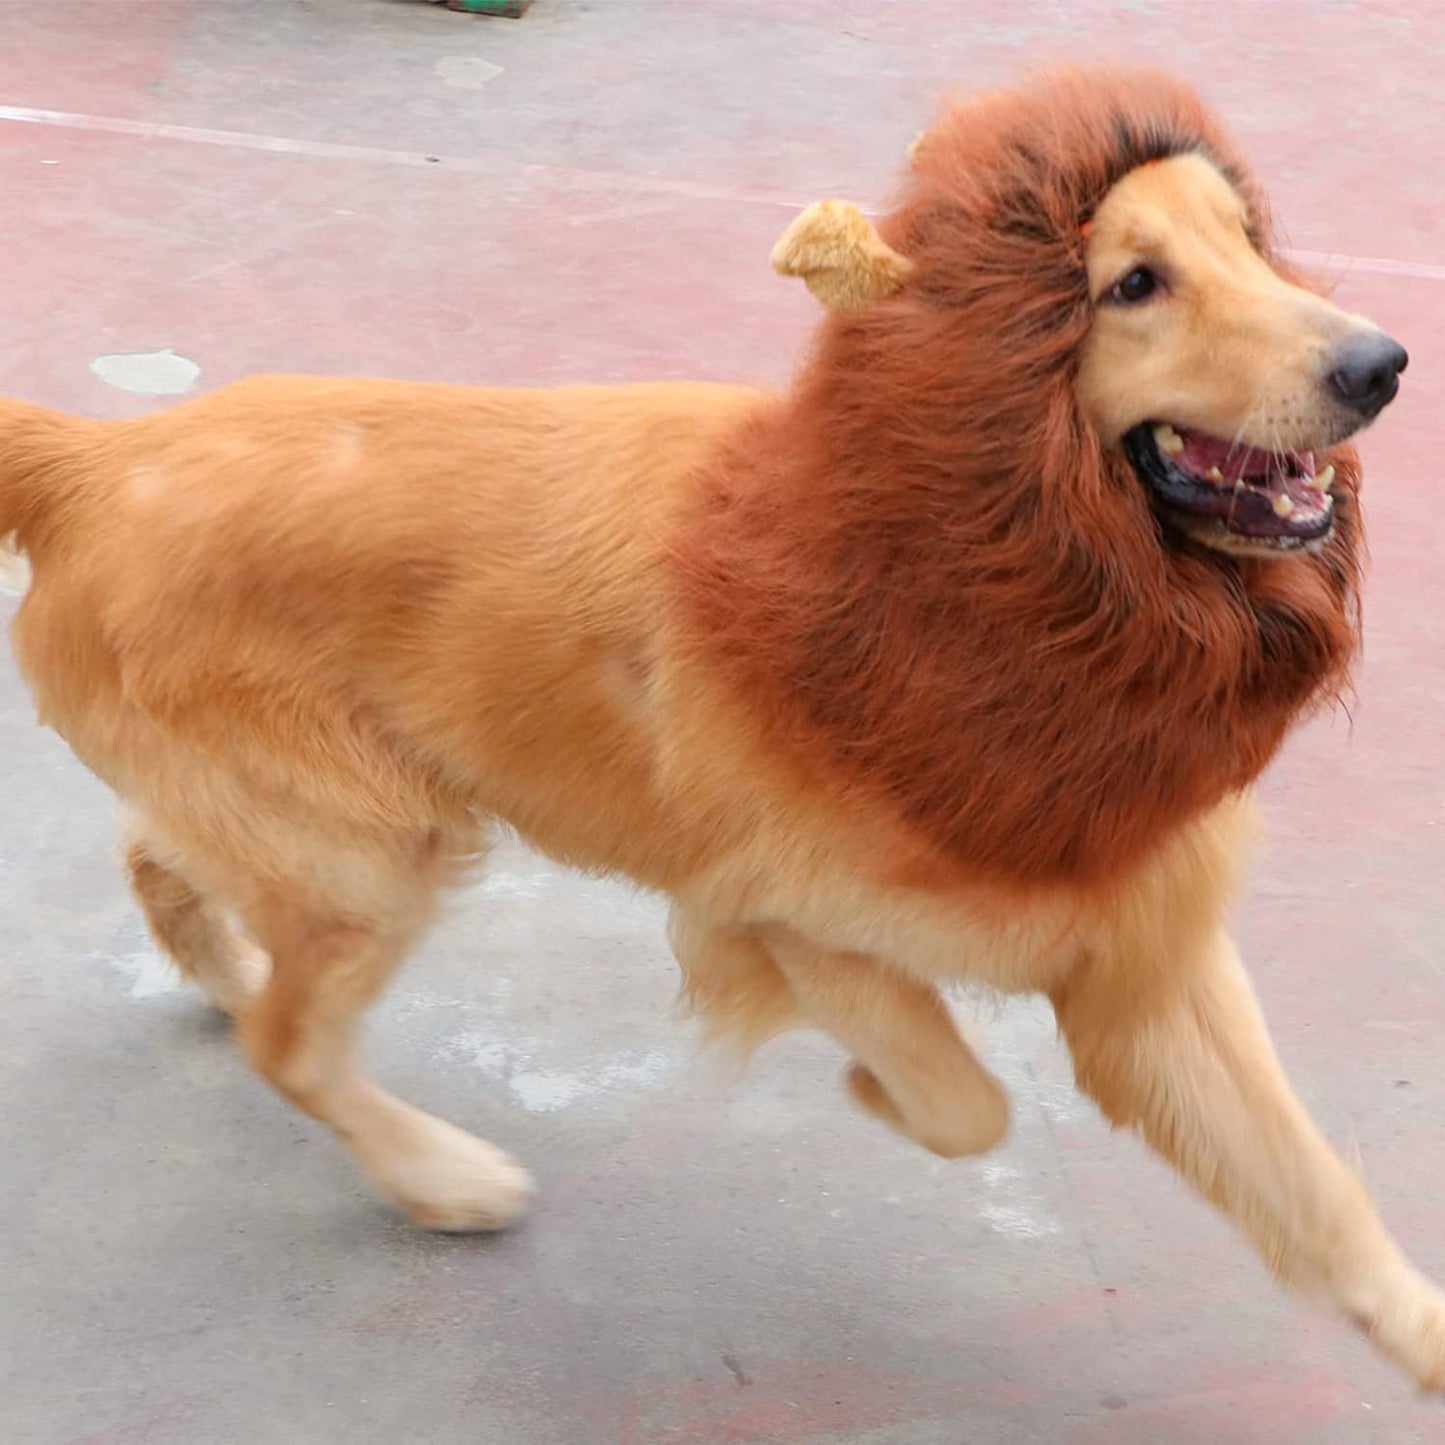 Lion Mane for Dog Costumes, Realistic Wig for Medium to Large Sized Dogs (Dark Brown)